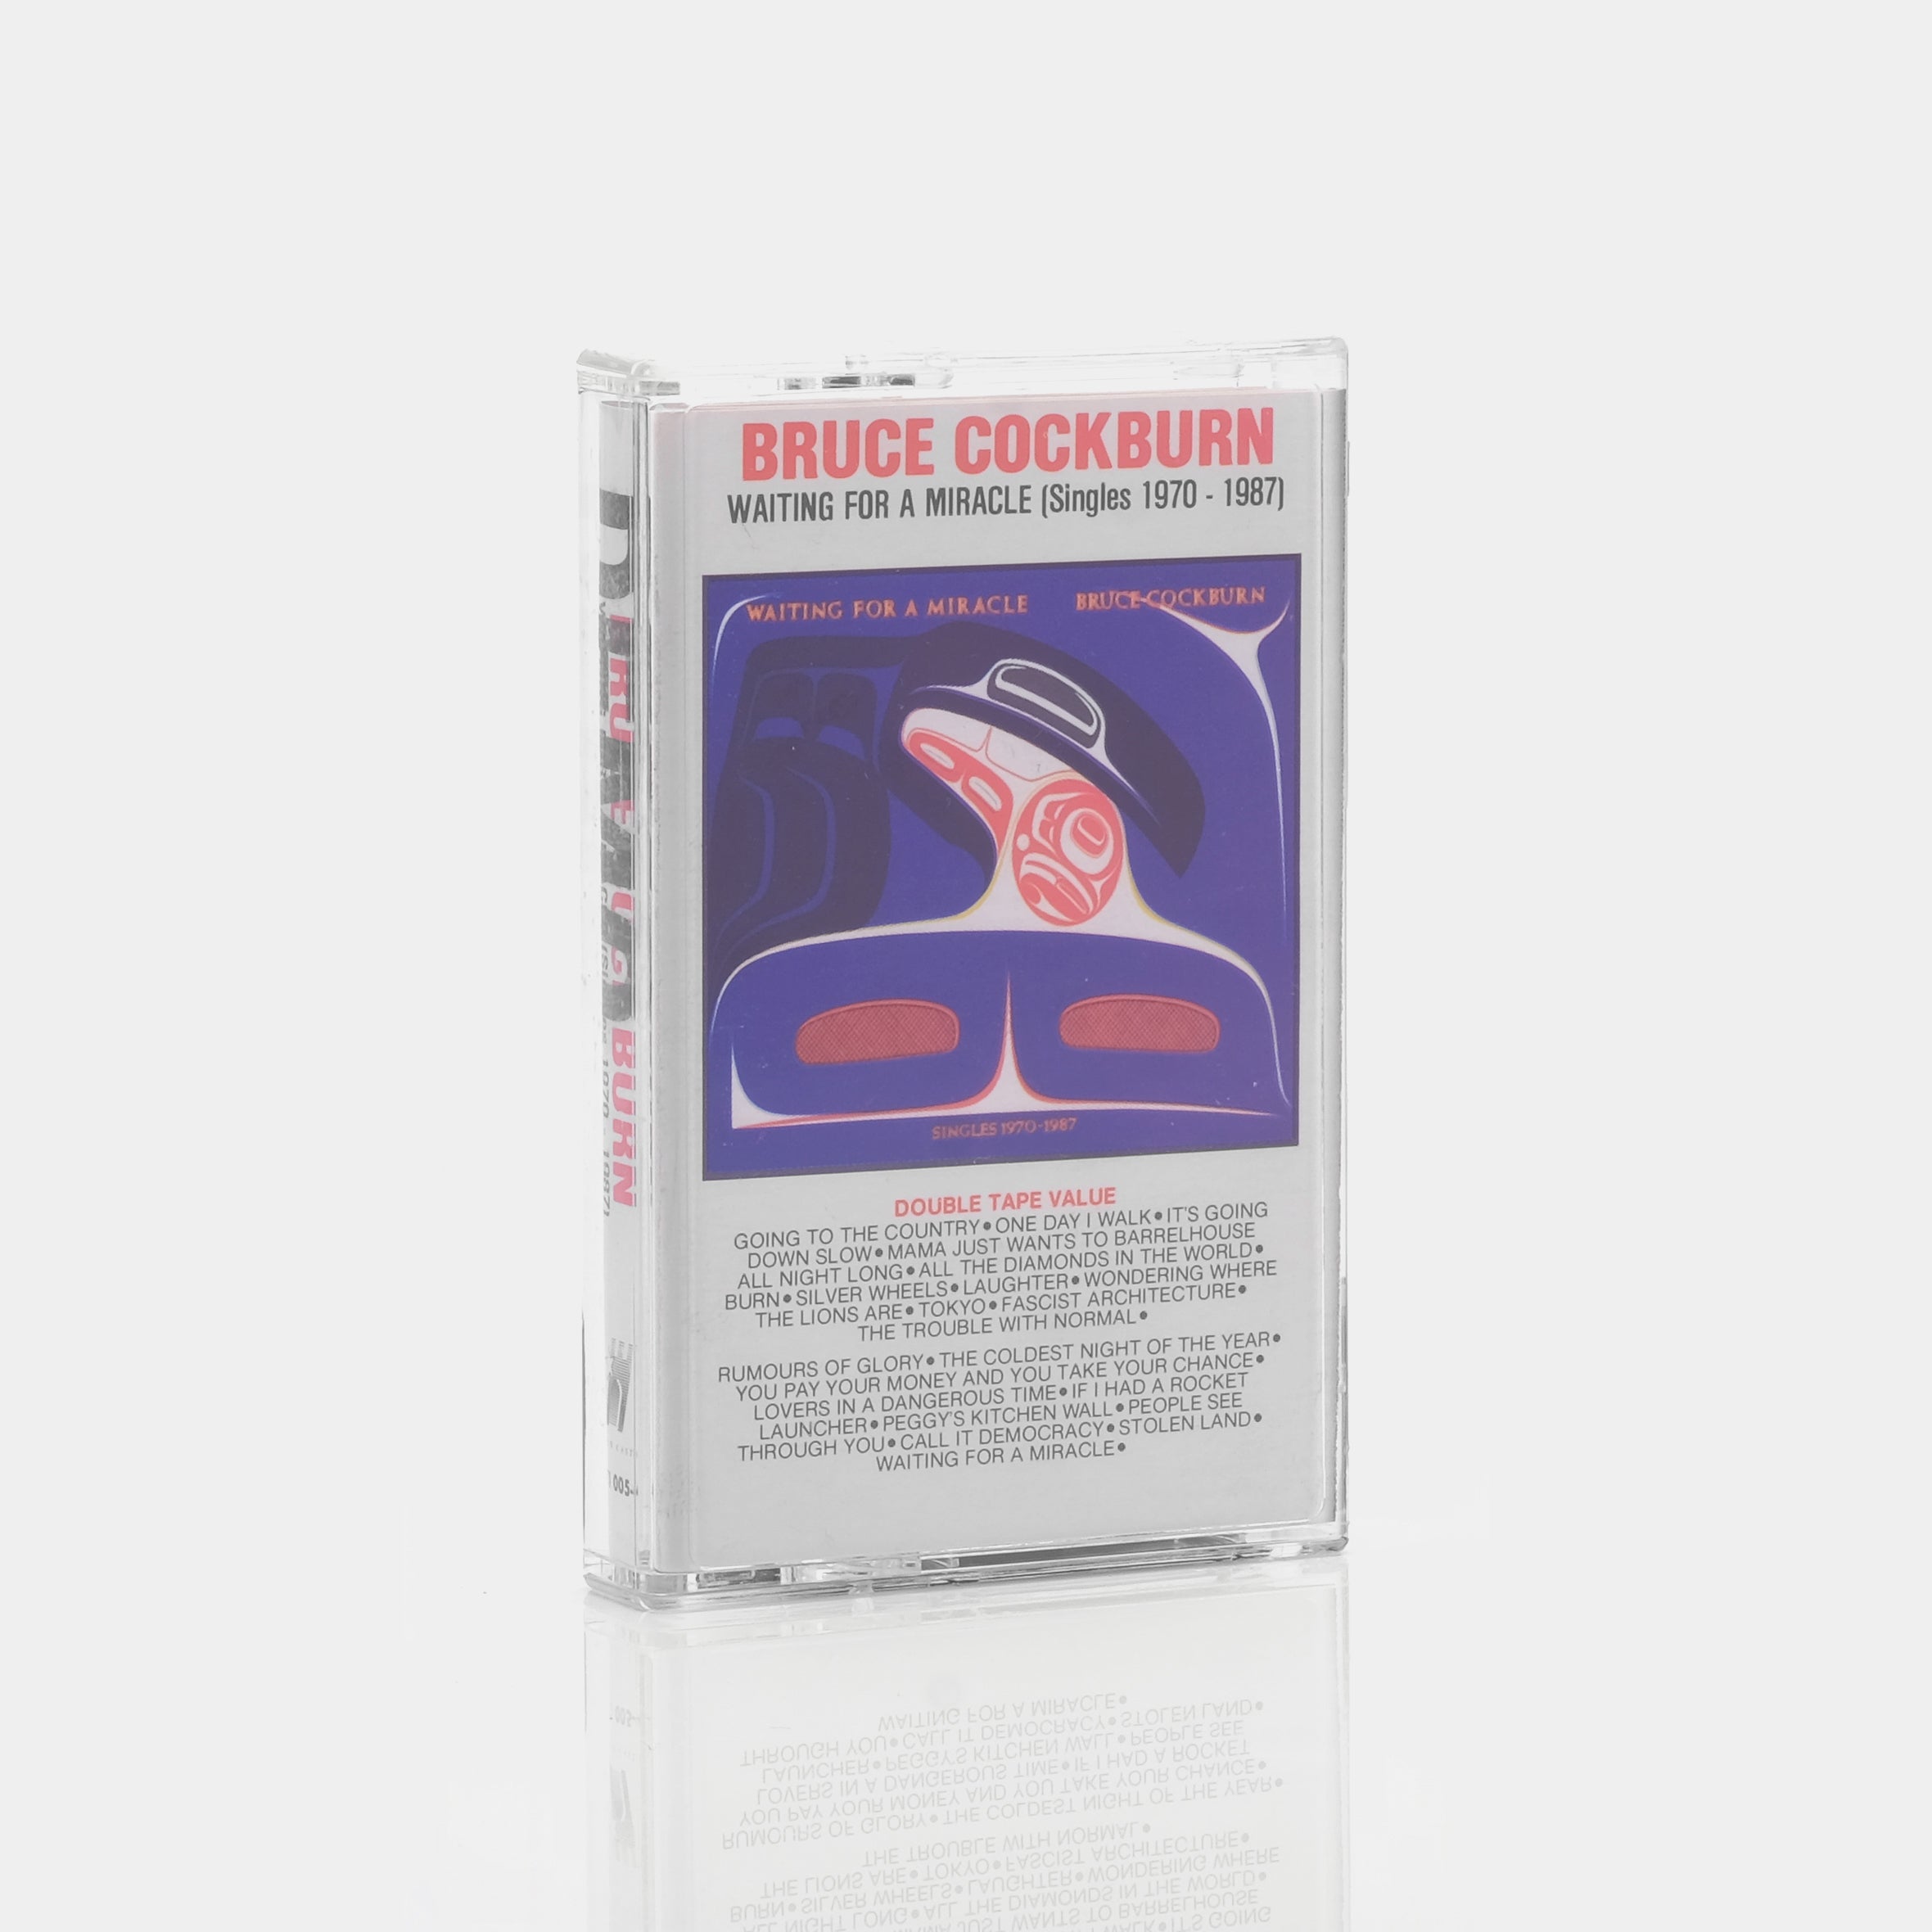 Bruce Cockburn - Waiting For A Miracle (Singles 1970-1980) Cassette Tape